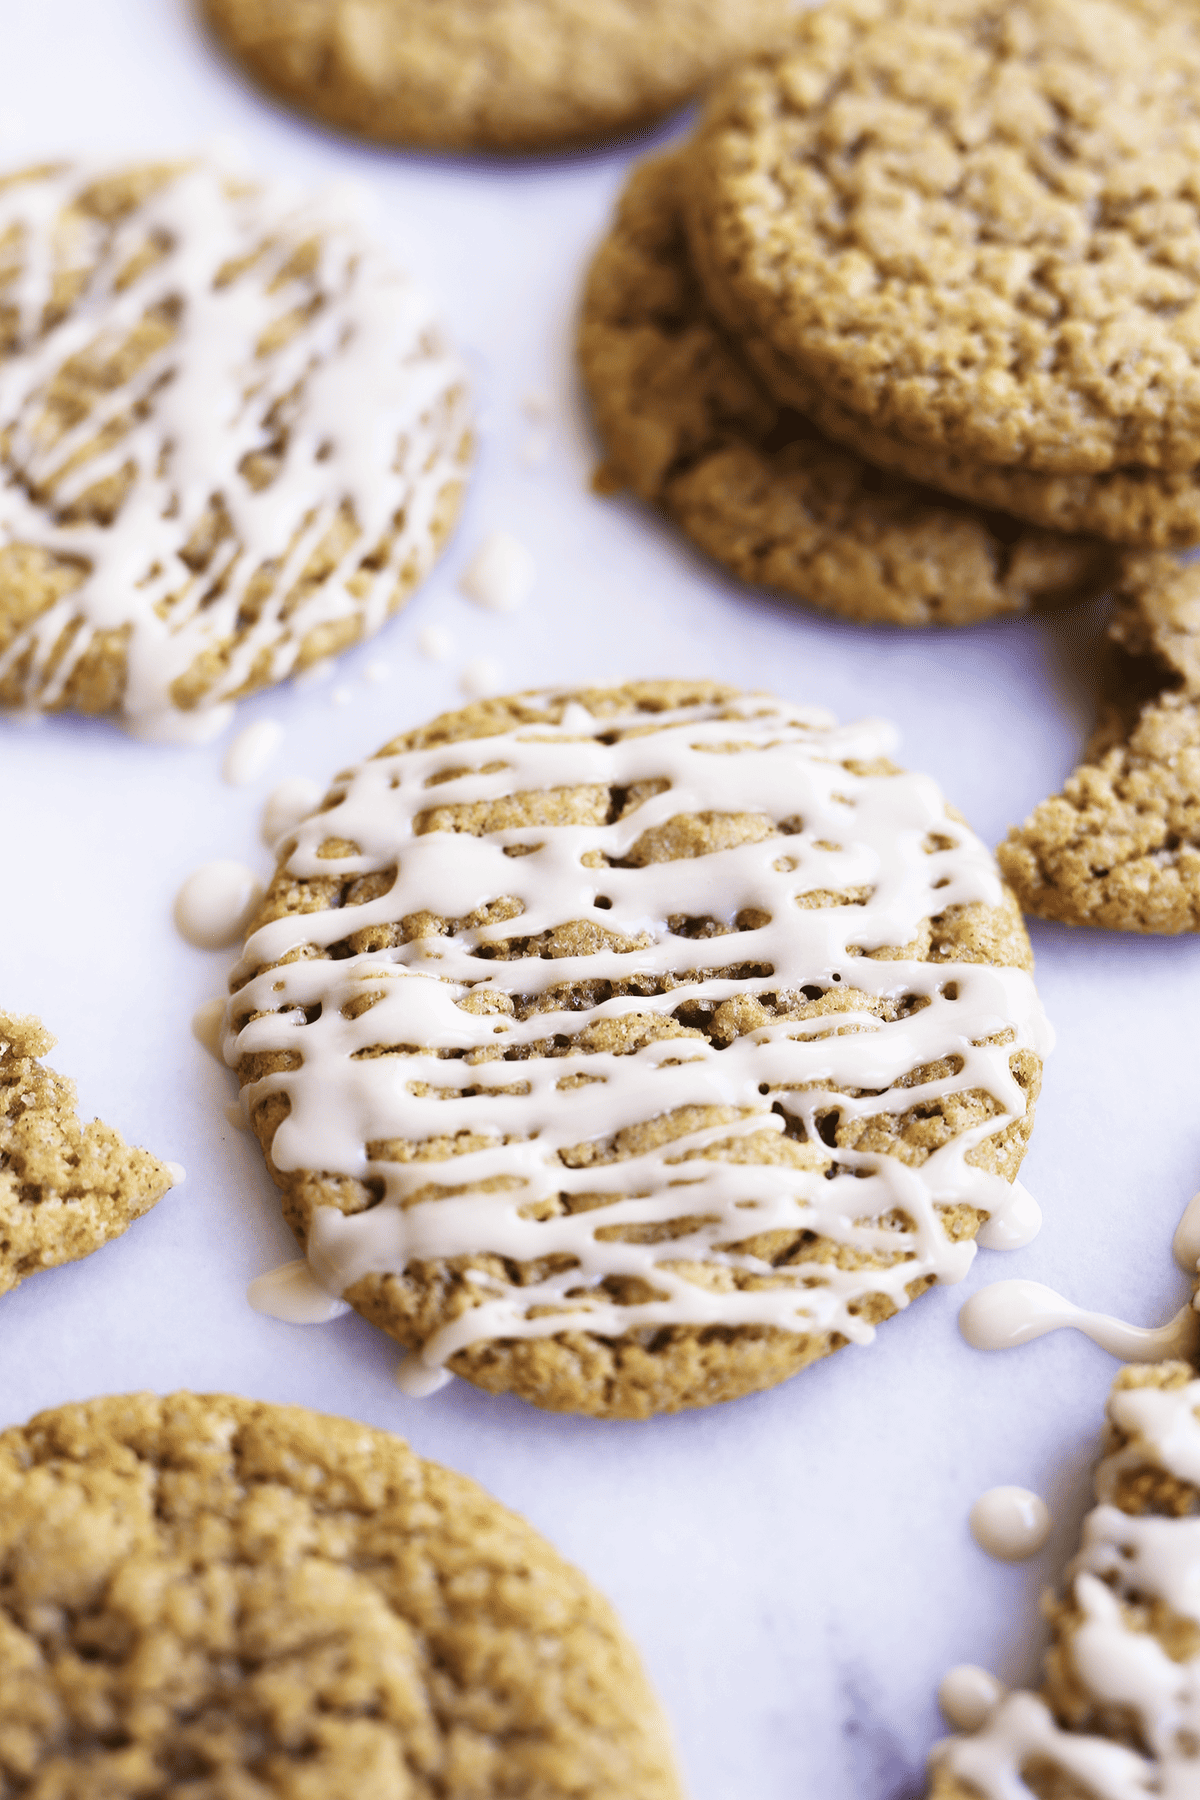 These Chewy Apple Cider Cookies are the best fall cookies ever! They are chewy in the middle and have crisps edges, they are vegan and absolutely delicious! These Chewy Apple Cider Cookies are the best fall cookies ever! They are chewy in the middle and have crisps edges, they are vegan and absolutely delicious!